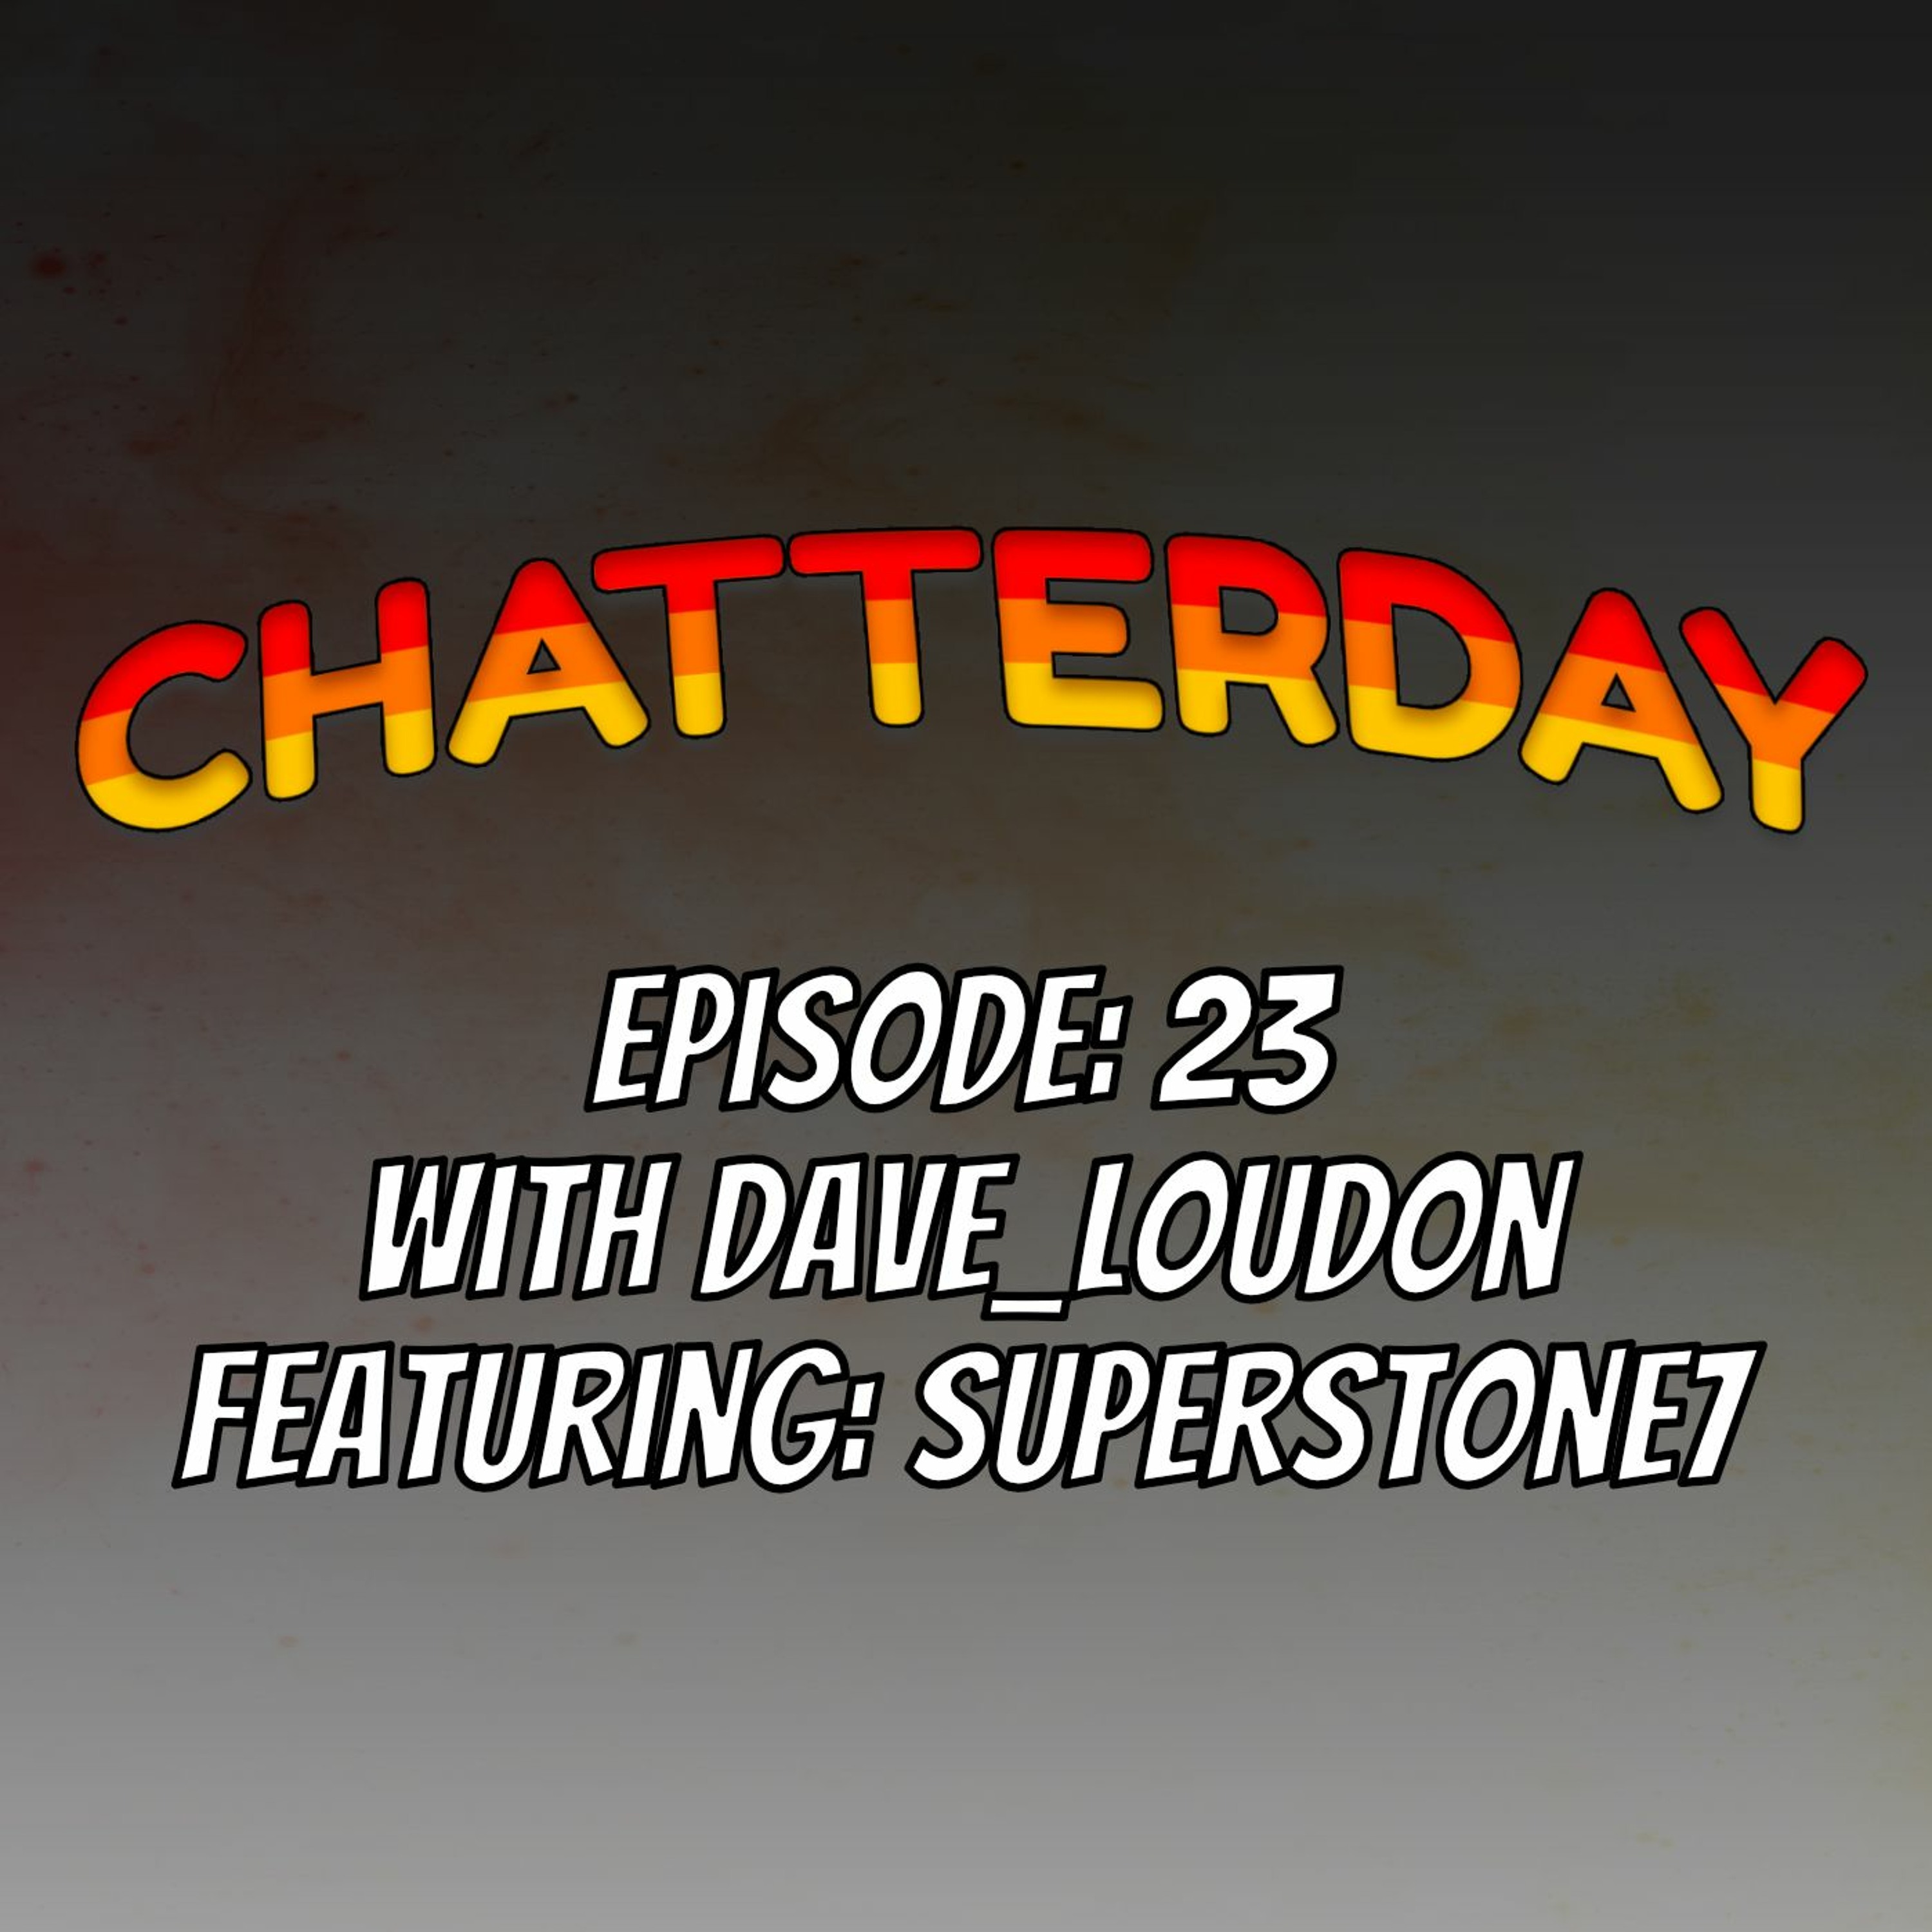 Chatterday Episode 23: SuperStone7